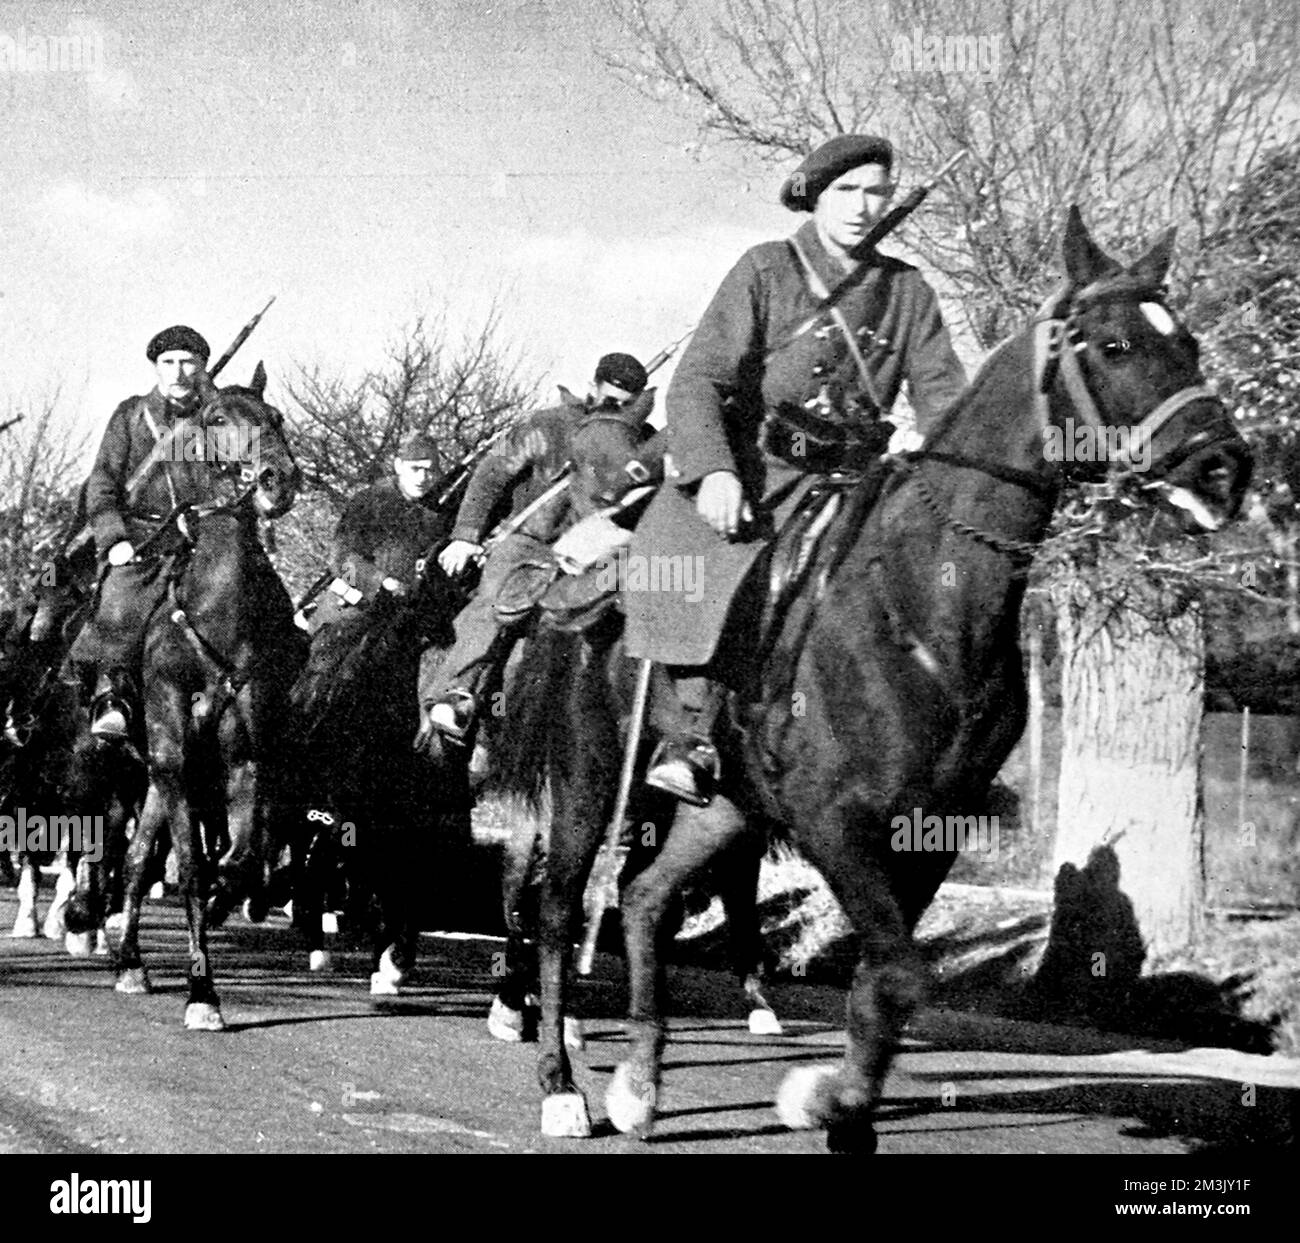 Photograph showing members of the Hungarian cavalry unit of the International Brigade, shown on their way to the Madrid front, during the Spanish Civil War, 1937.      The International Brigade was made up of volunteers from all over Europe and North America, who went to Spain to fight for the Republican Government.     Date: 1937 Stock Photo